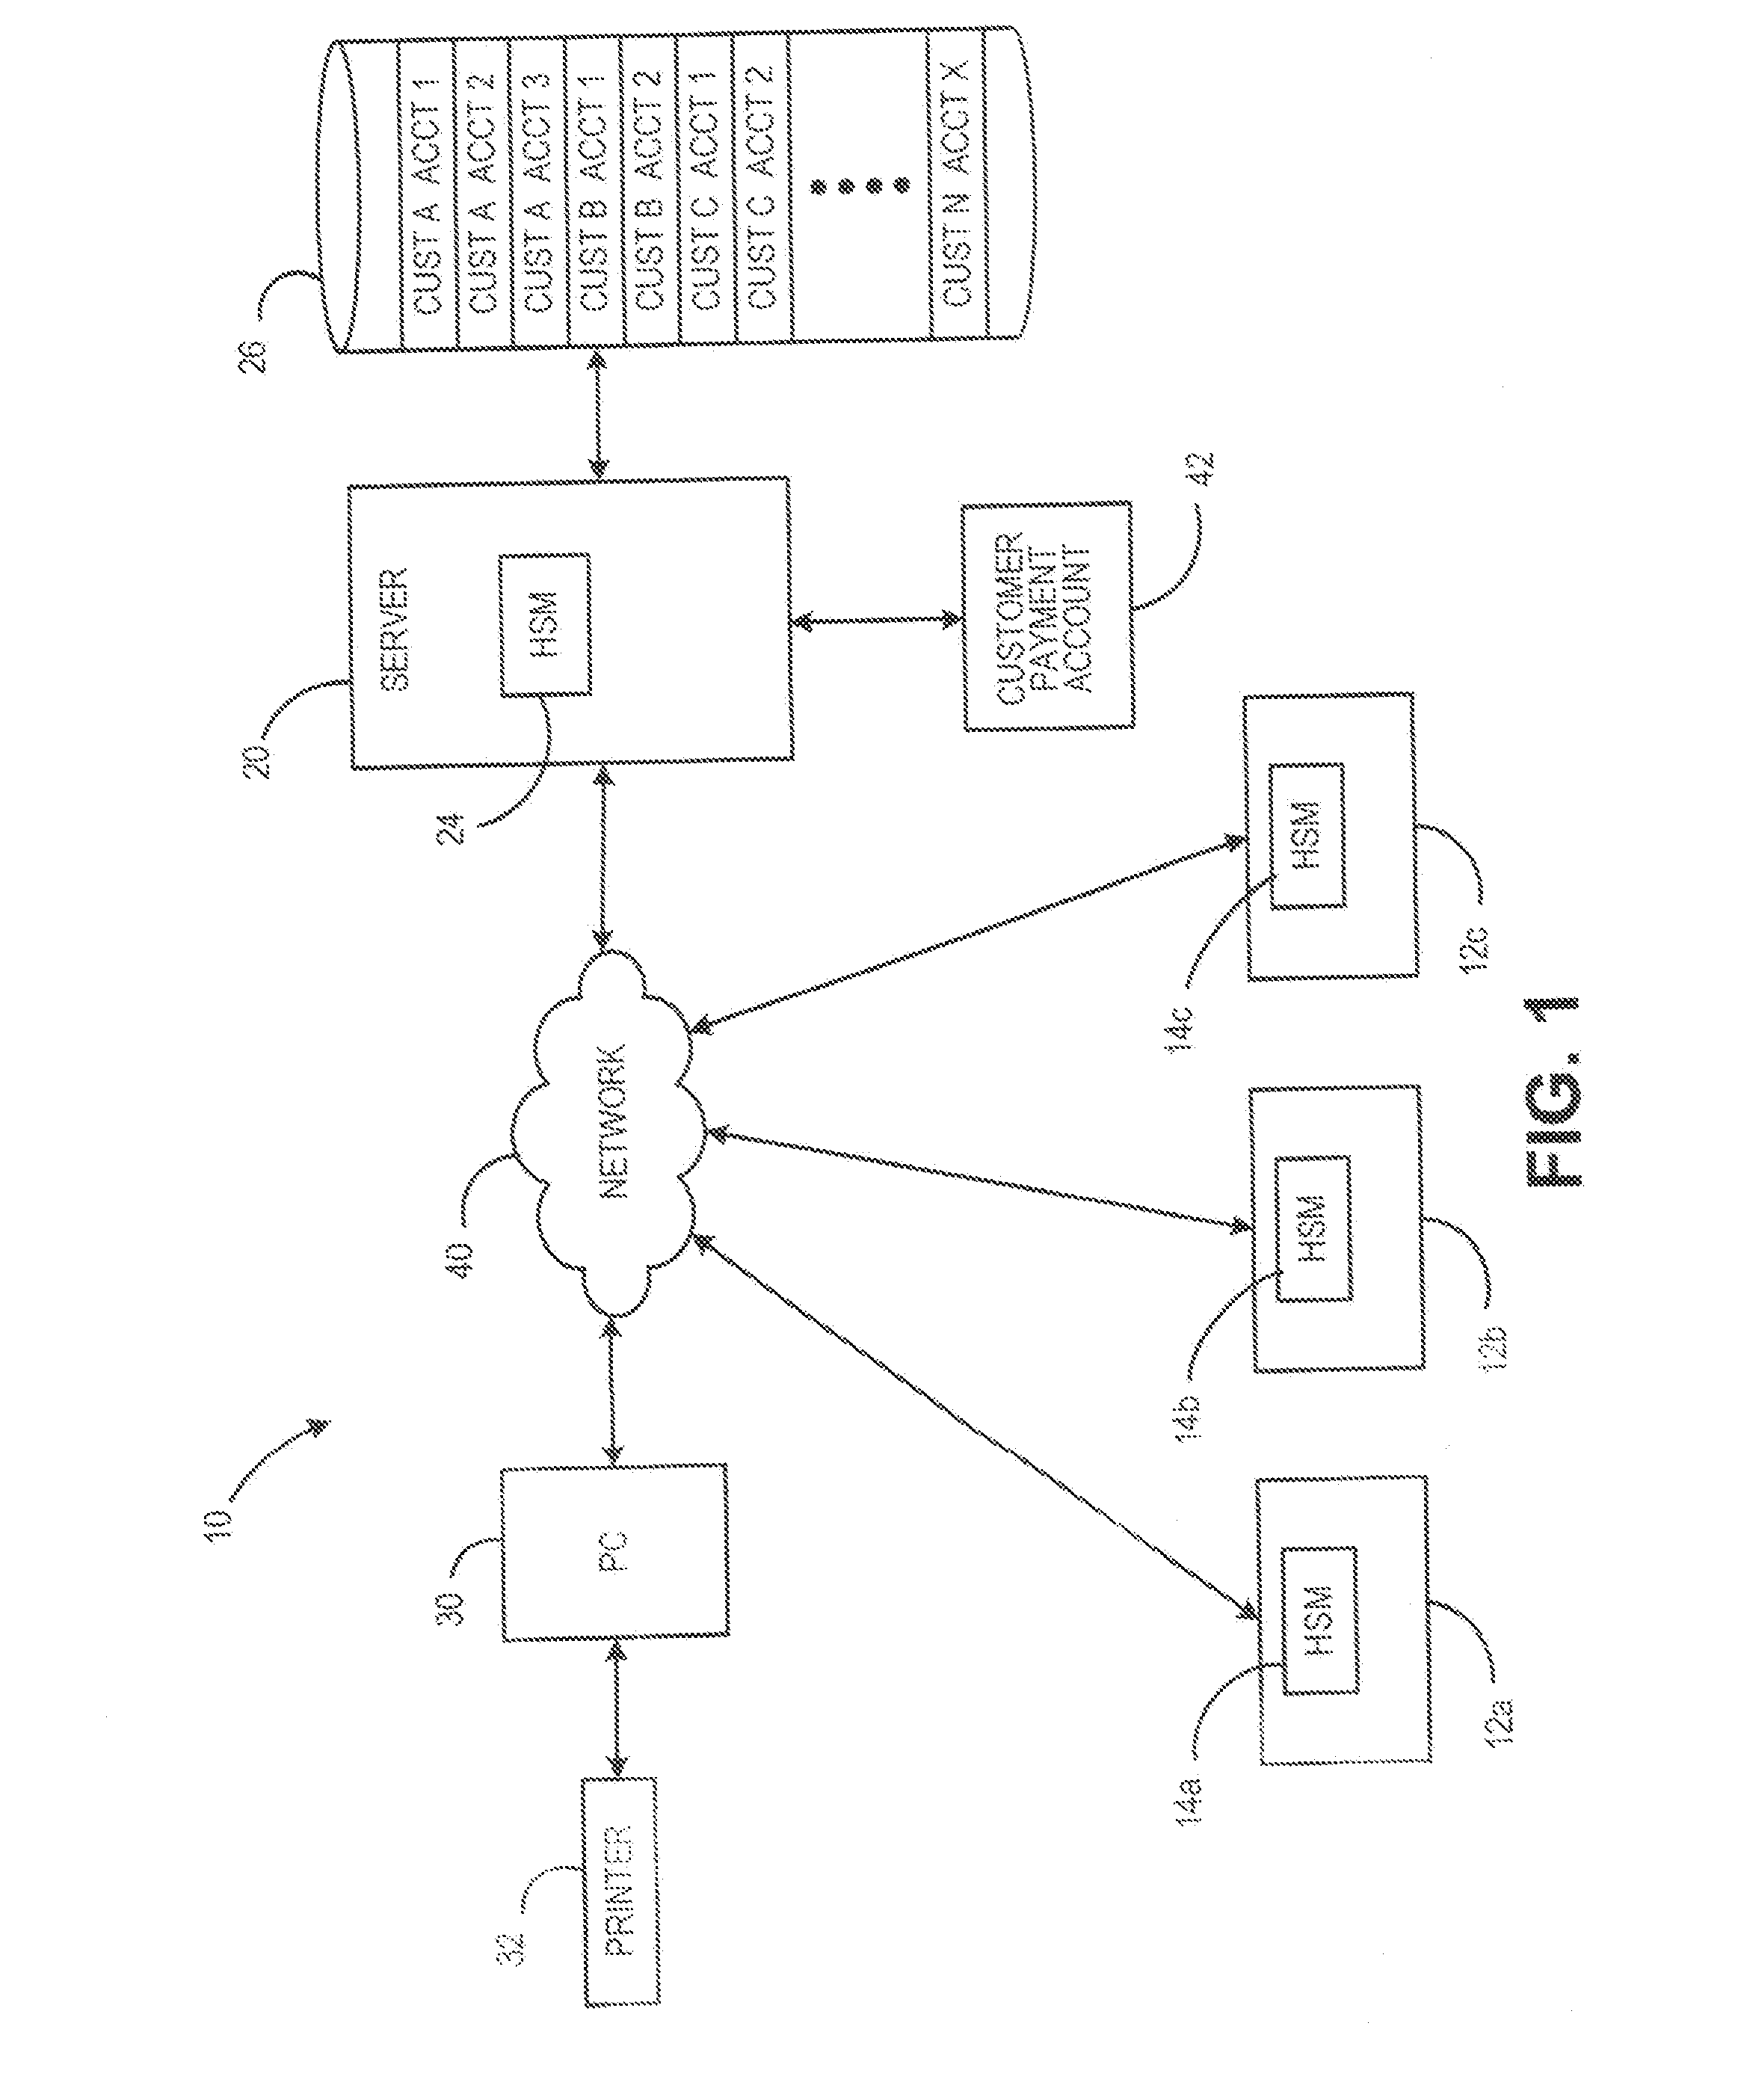 Method and system for supporting multiple postage printing devices using multiple customer accounts without having to maintain funds in each customer account